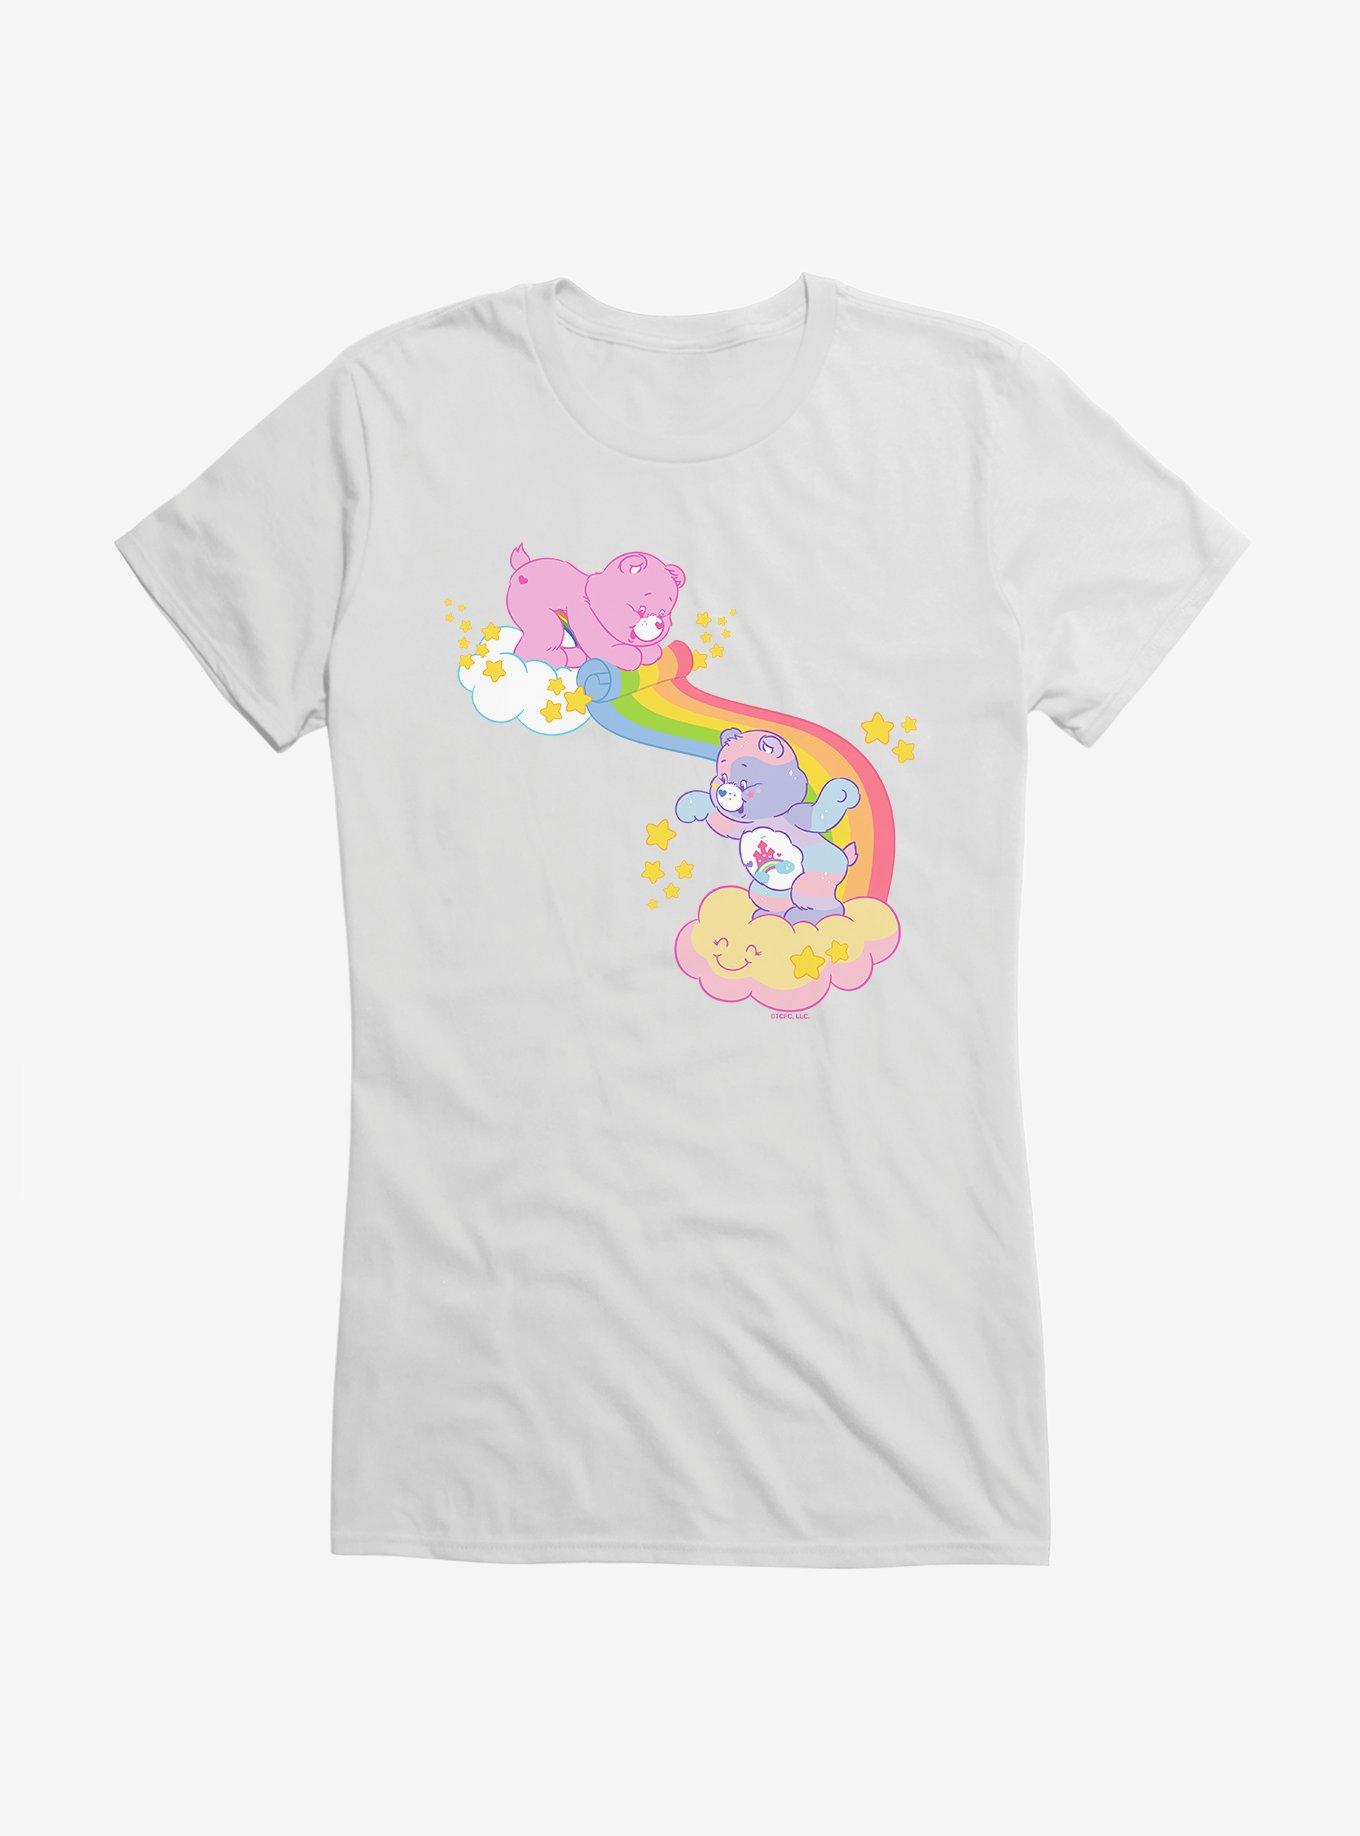 Care Bears In The Clouds Girls T-Shirt, WHITE, hi-res